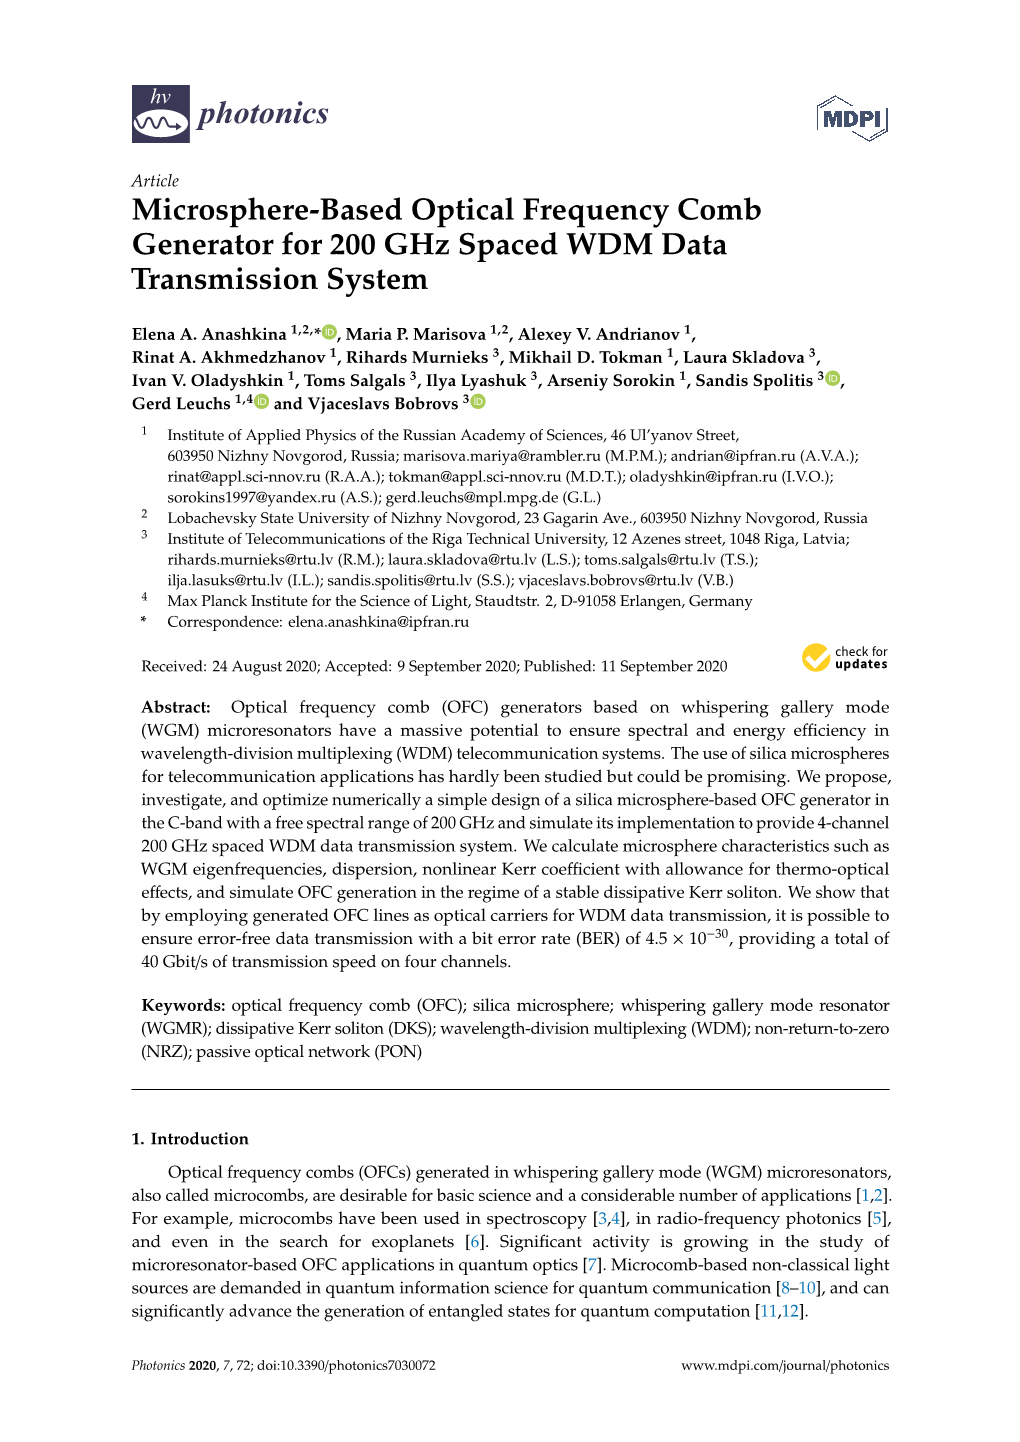 Microsphere-Based Optical Frequency Comb Generator for 200 Ghz Spaced WDM Data Transmission System